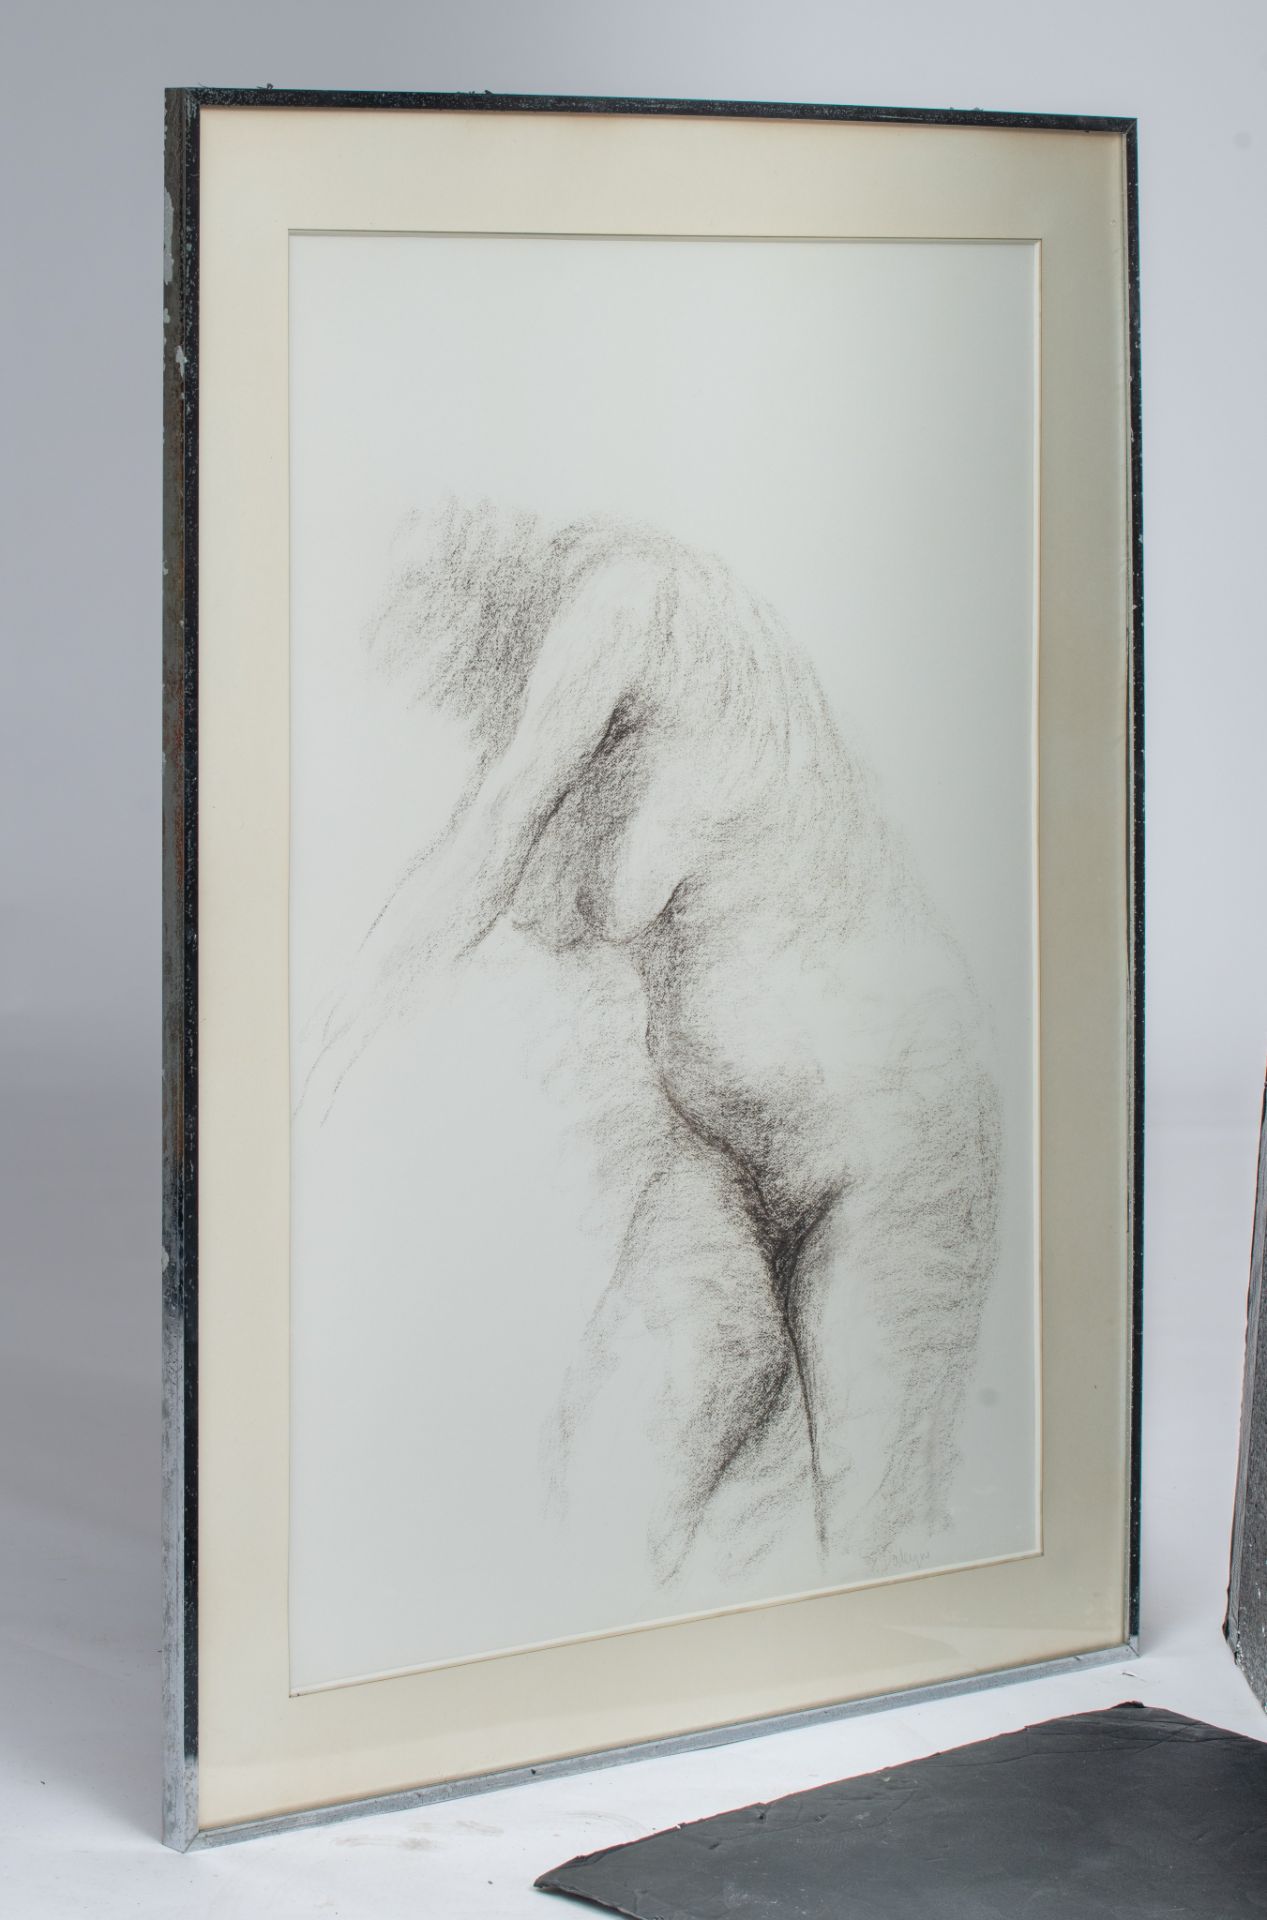 Eugene Dodeigne (1923-2015), female nude, charcoal drawing, 73 x 106 cm - Image 3 of 4